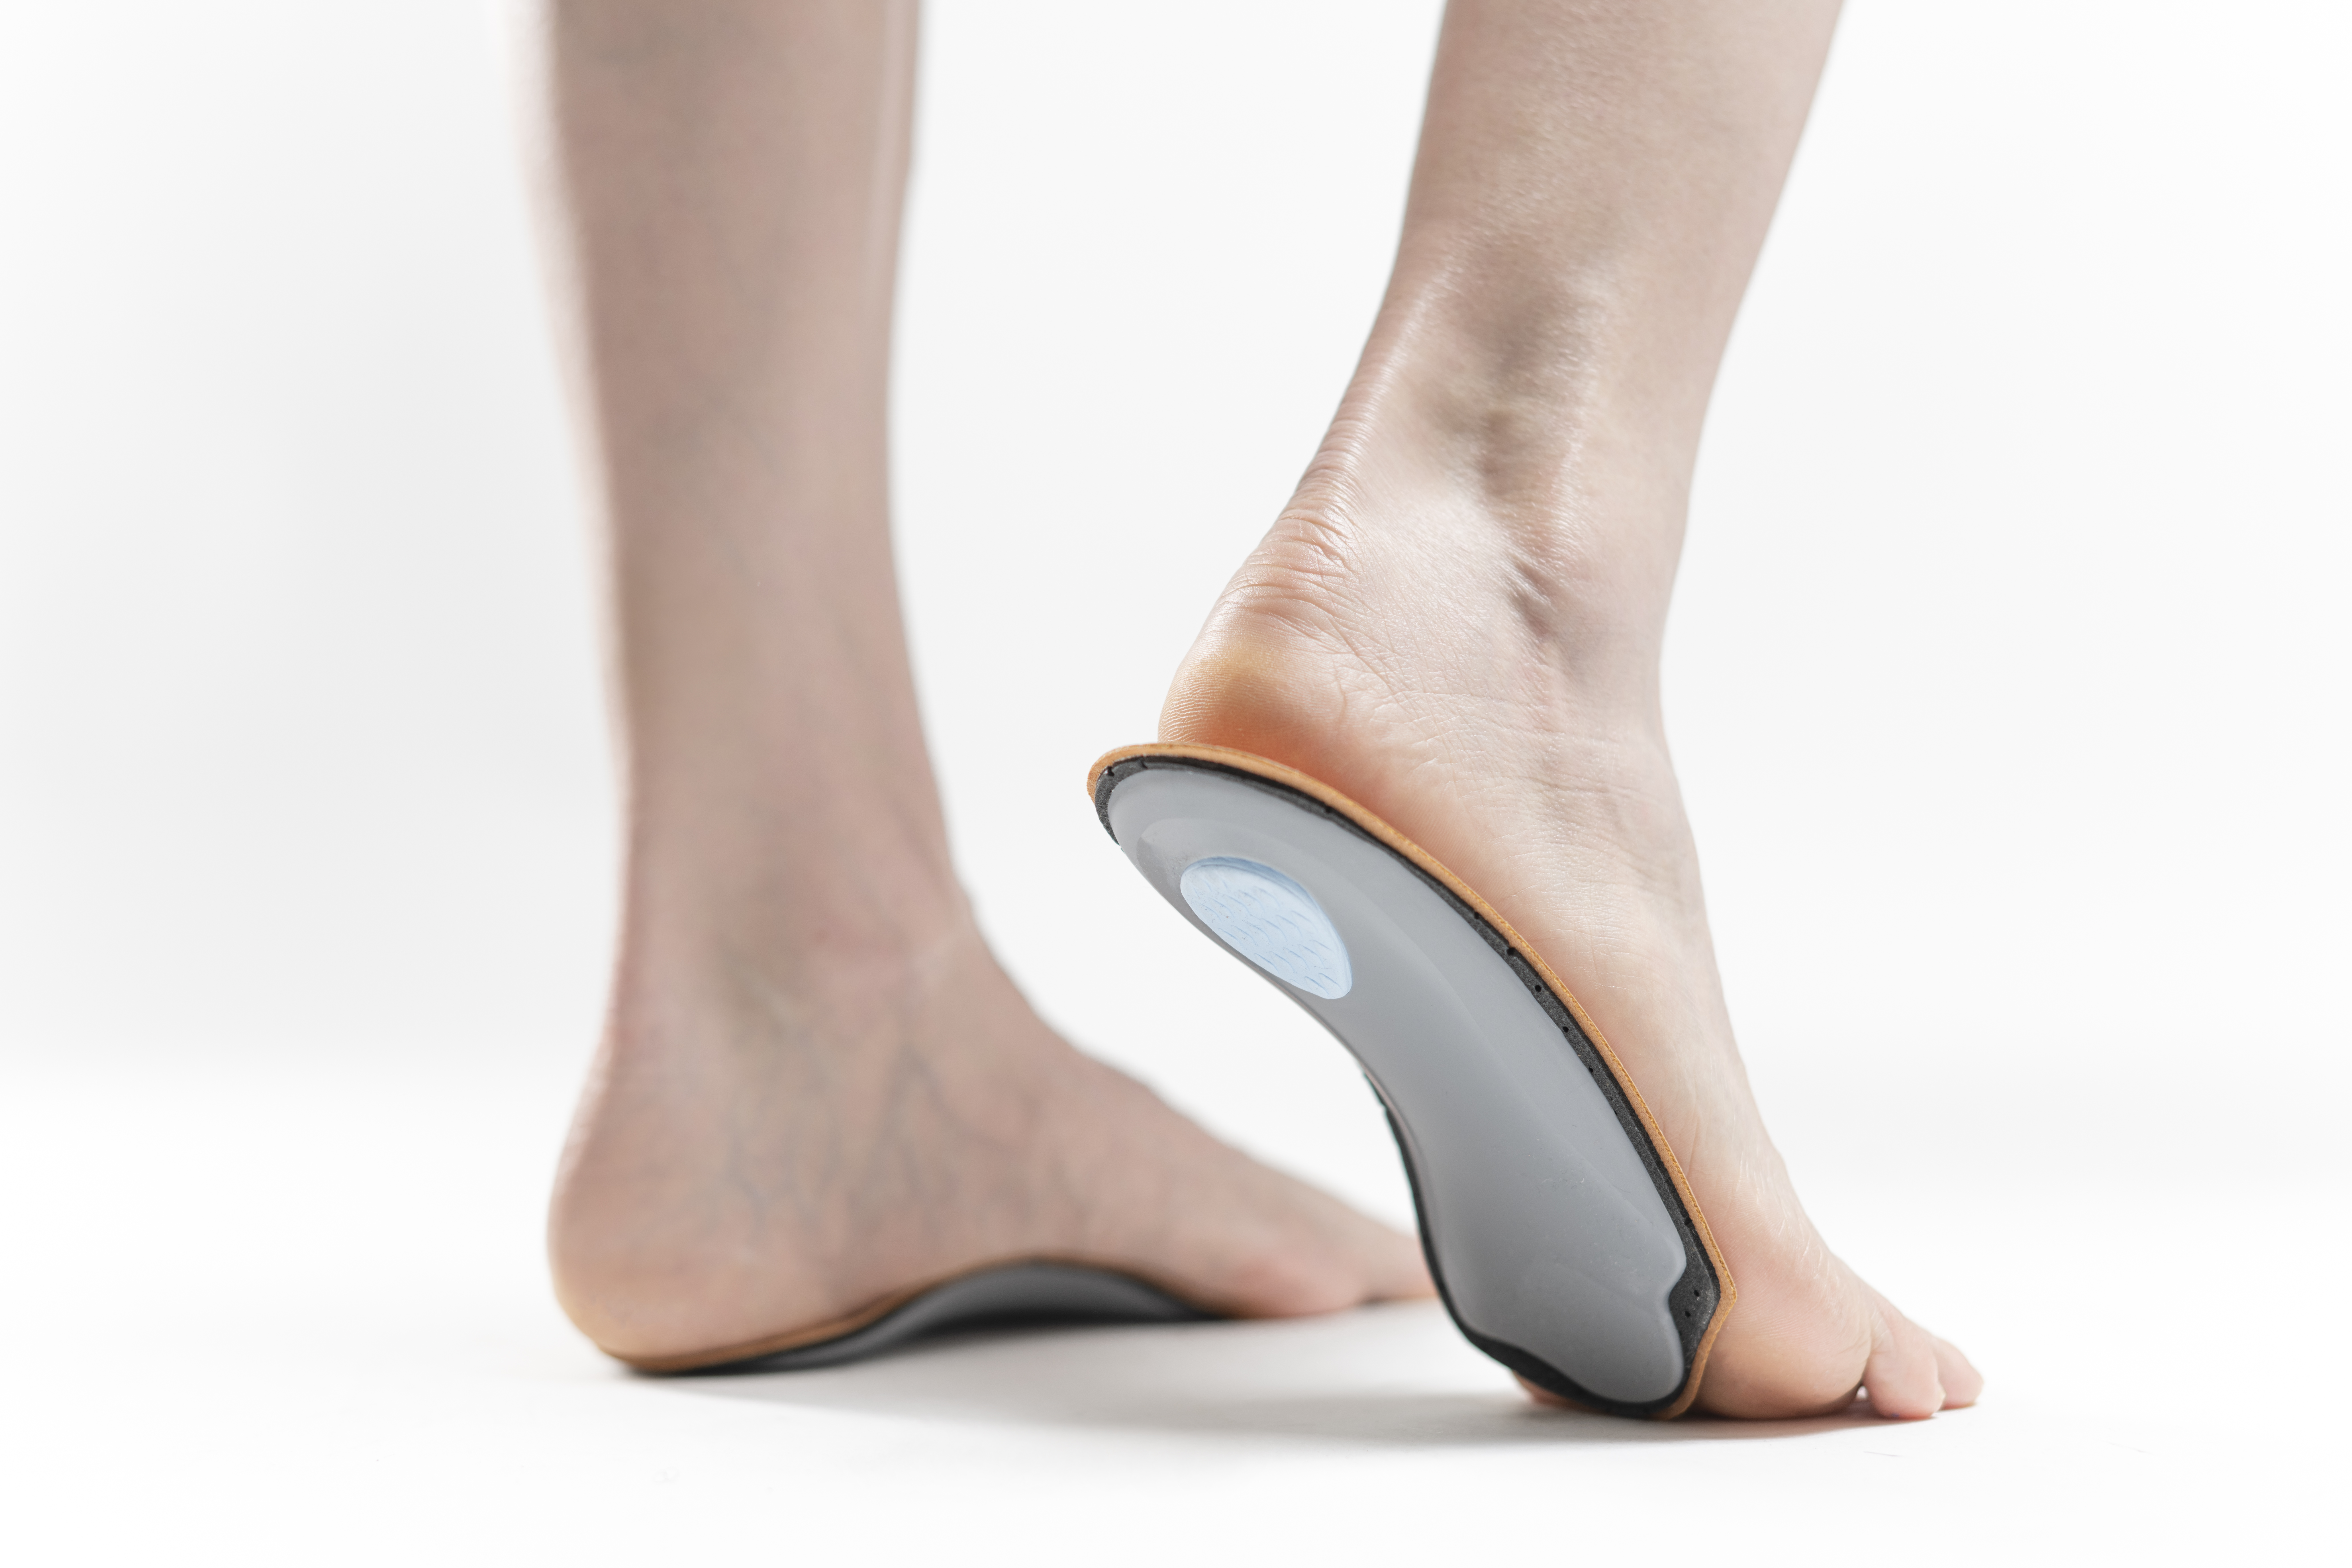 3 Exercises To Avoid When Dealing With Heel Pain